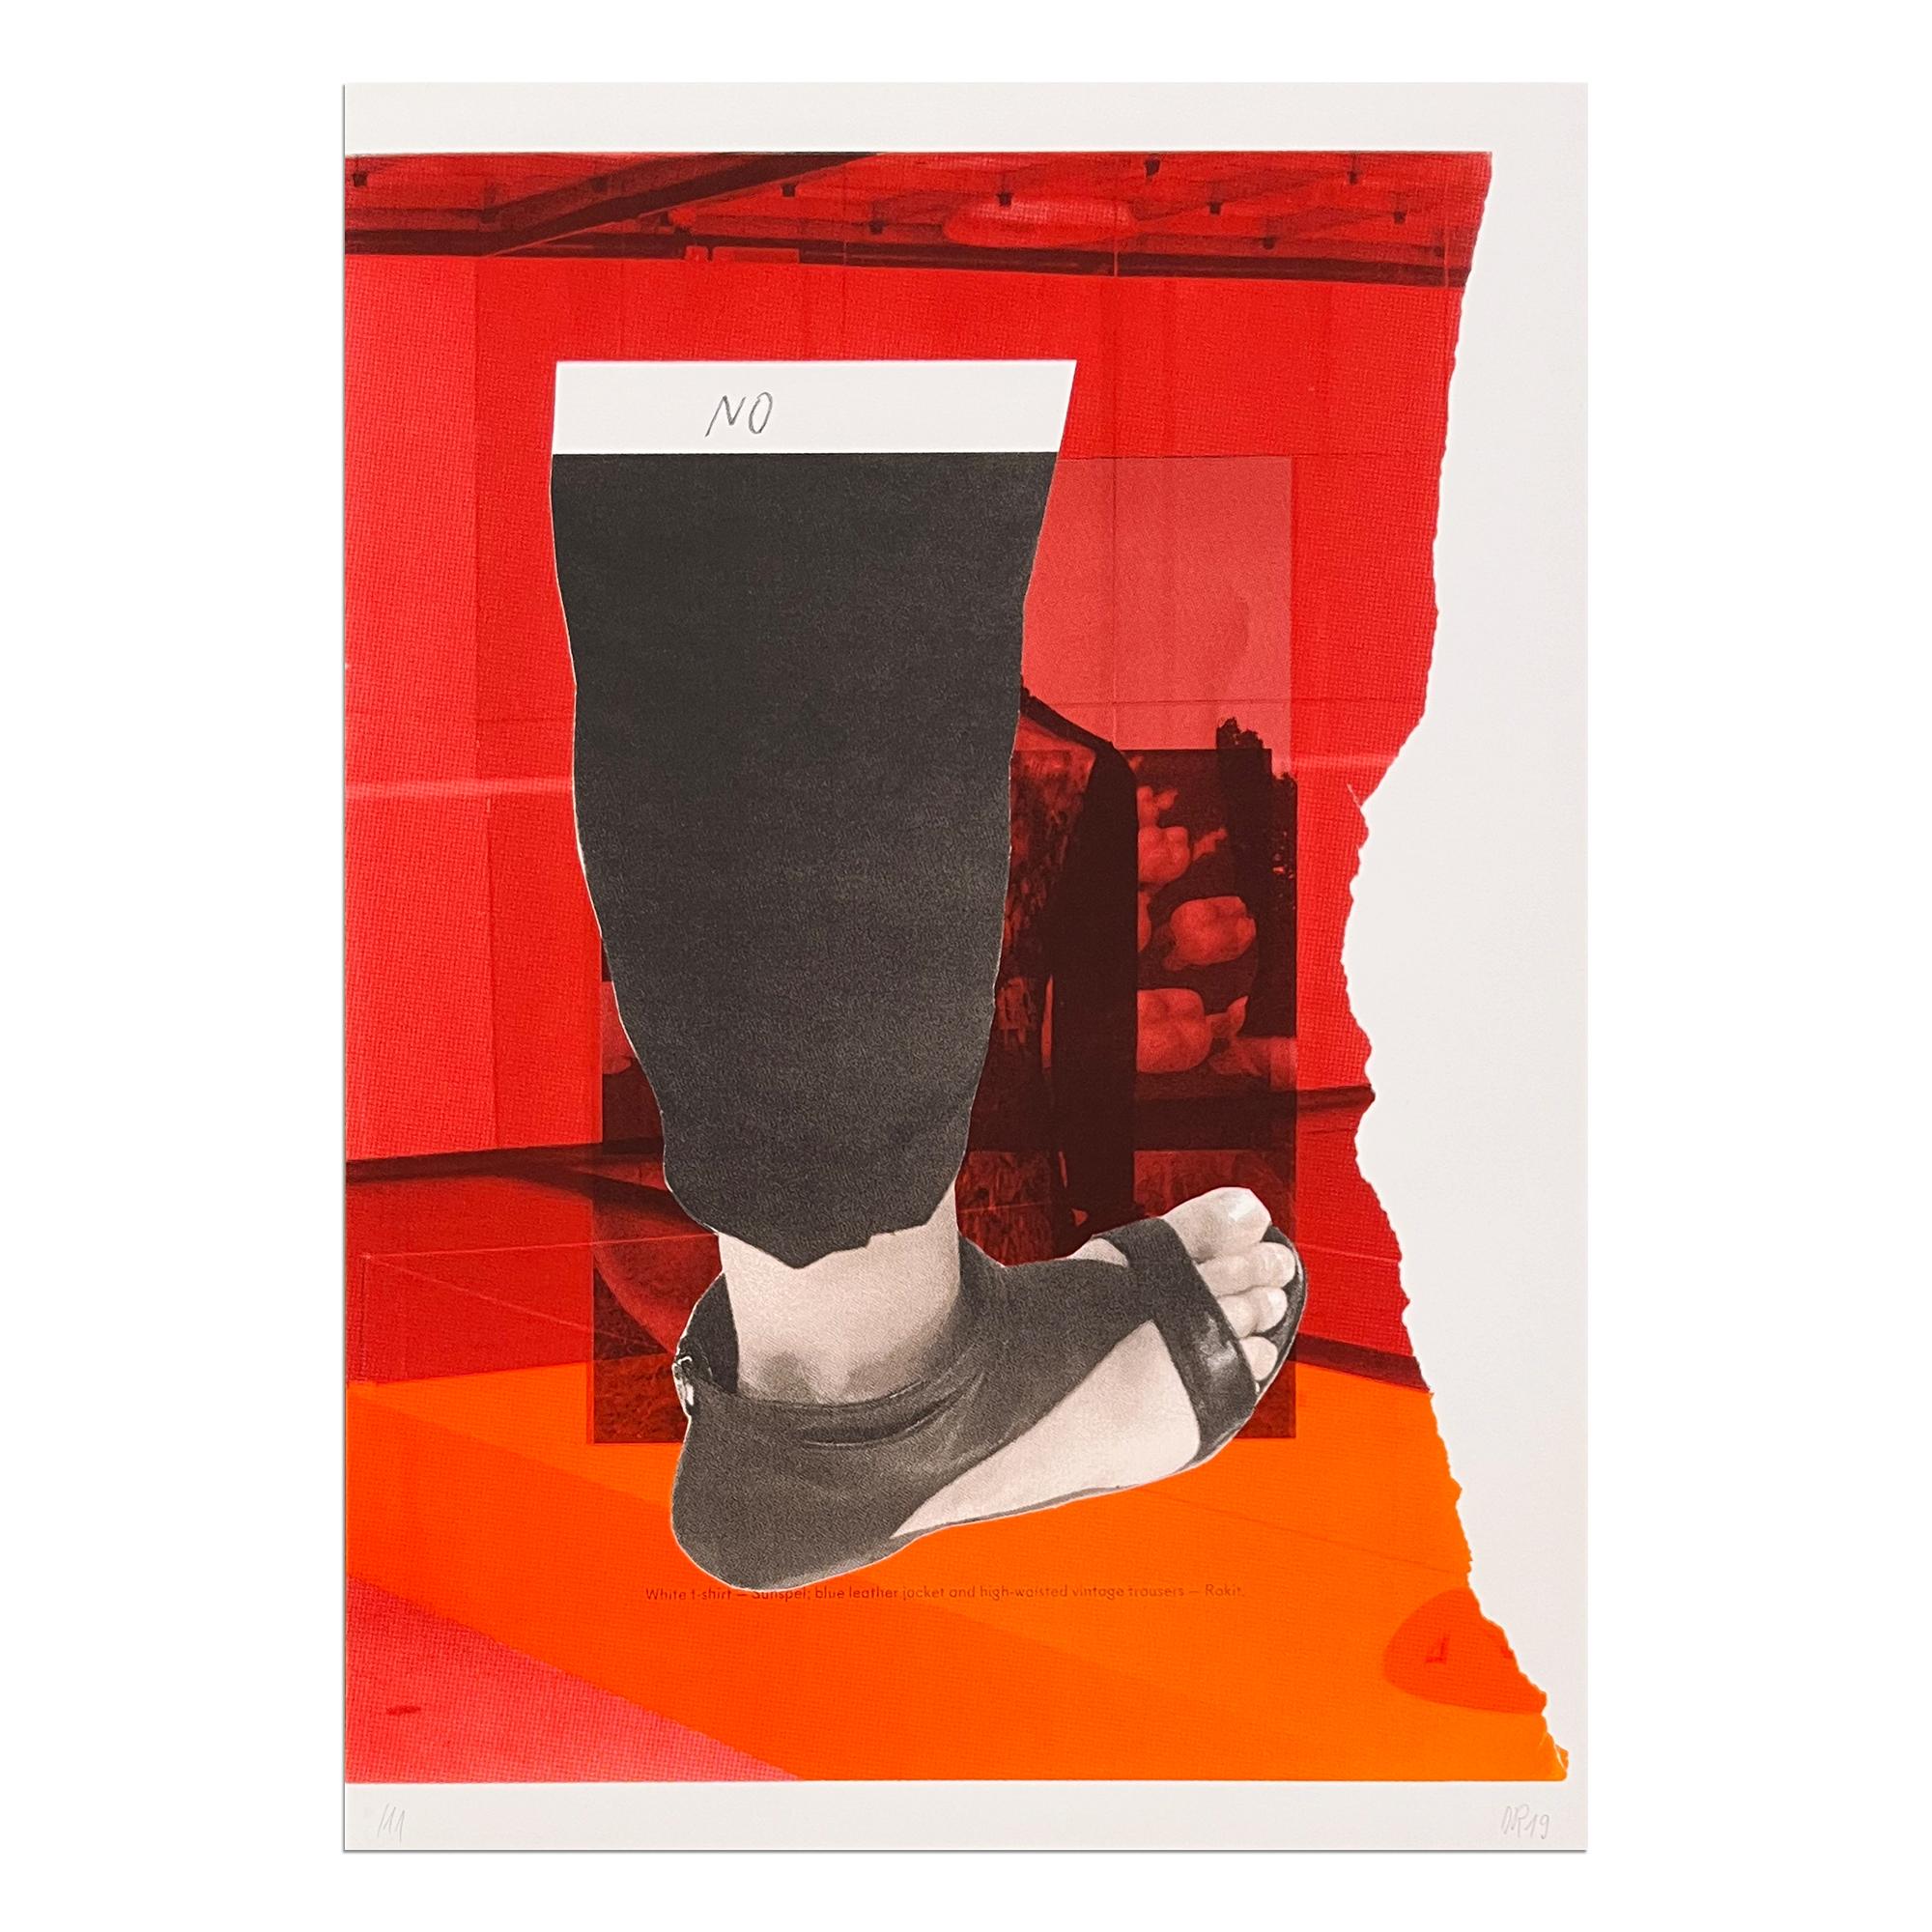 Daniel Richter (German, born 1962)
Untitled (from 11 Screenprints), 2019
Medium: Screenprint on paper
Dimensions: 59.4 x 42 cm
Edition of 11: Hand-signed and numbered
Condition: Excellent